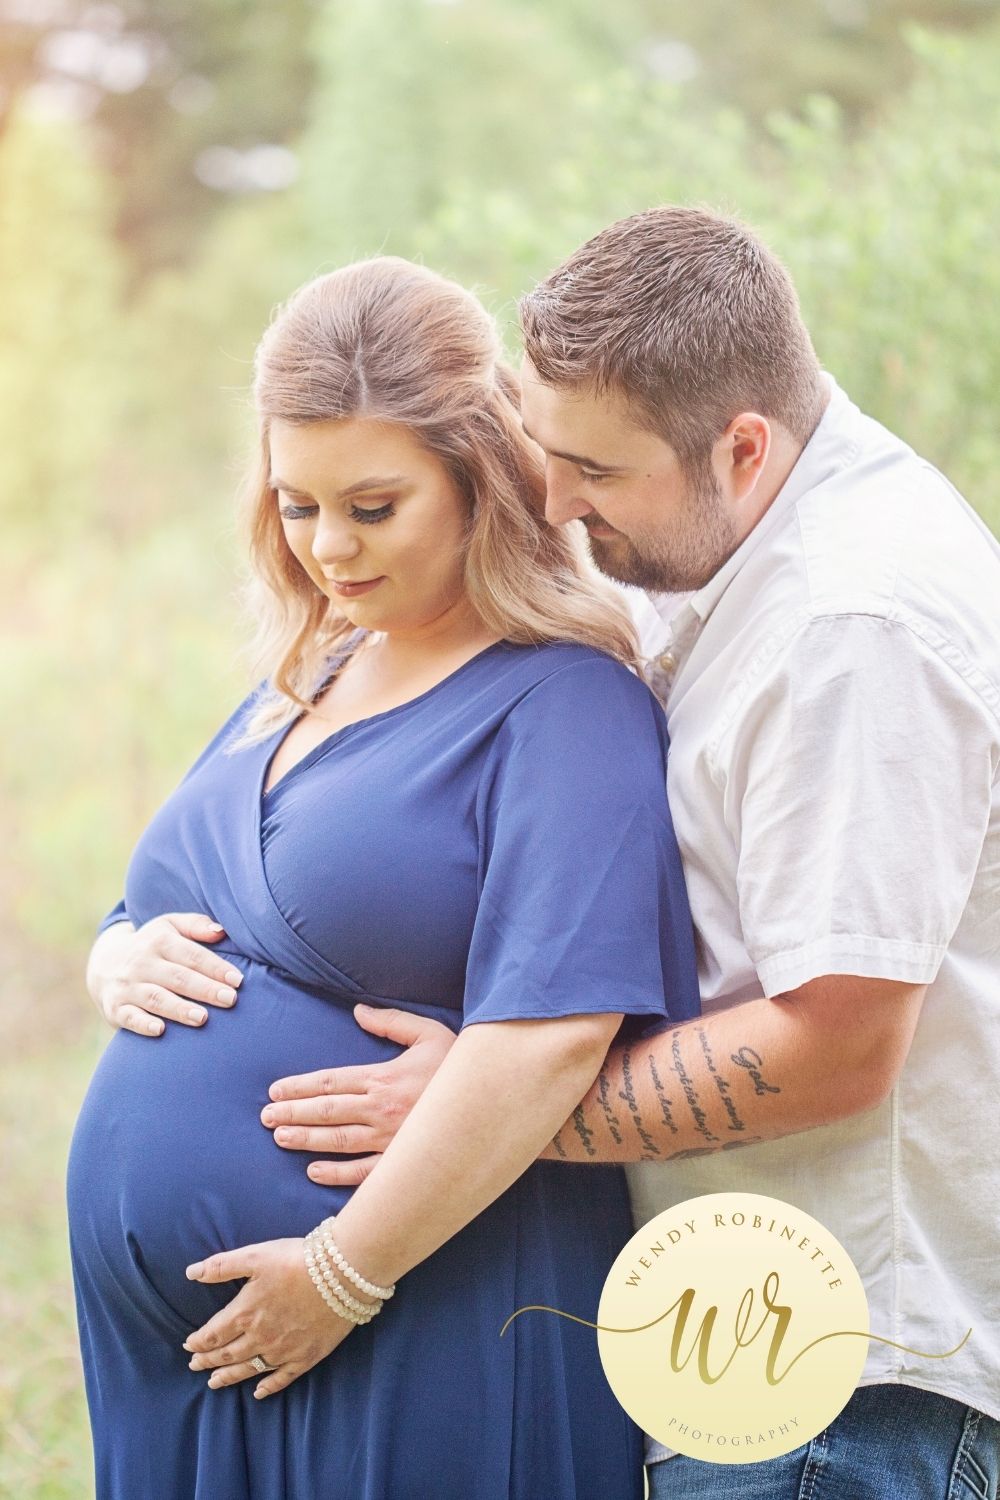 maternity session in Natchitoches Parish